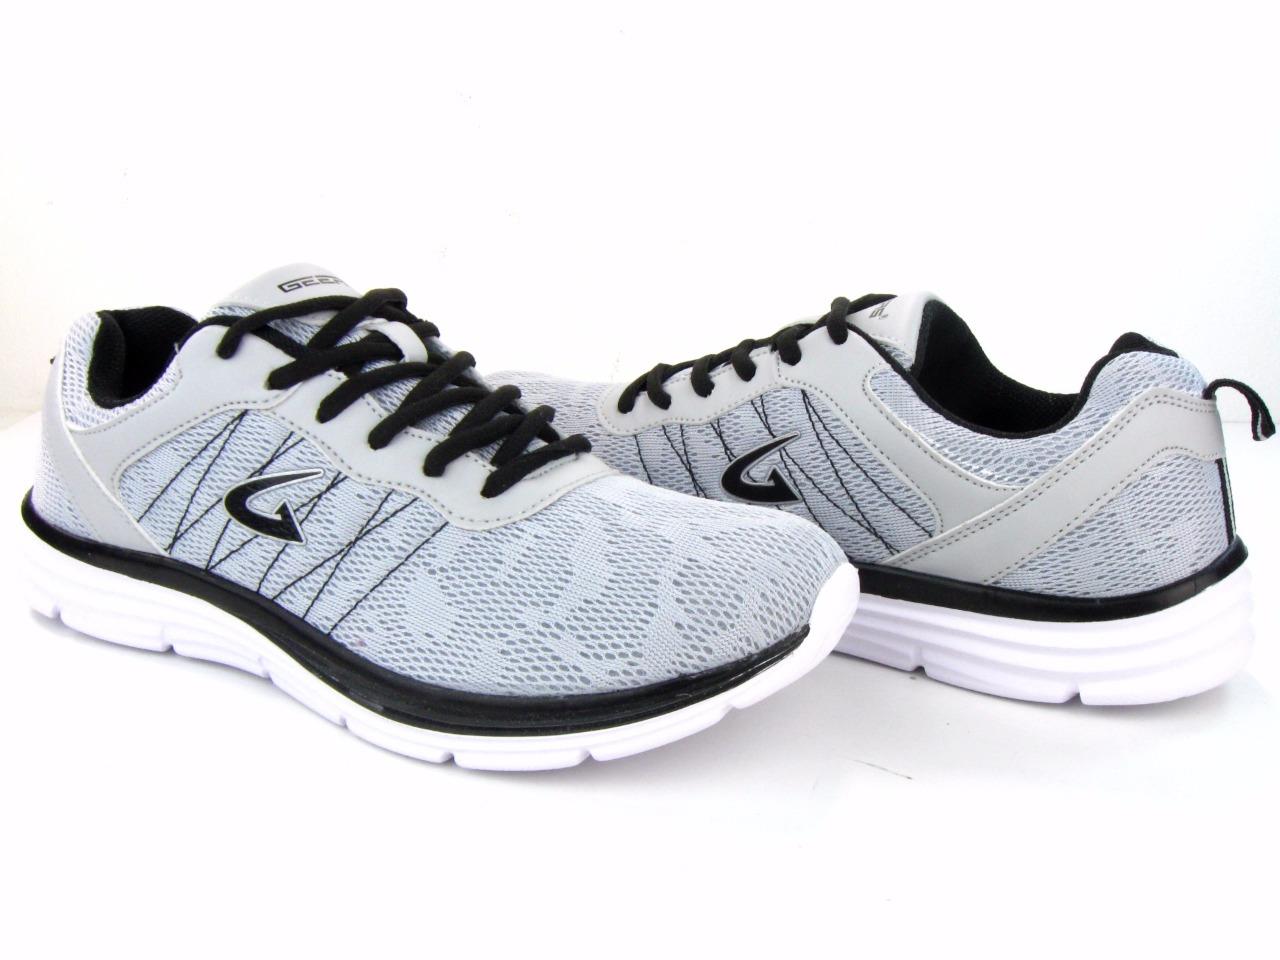 Men's Athletic Sneakers Light Weight Tennis Shoes Running Walking ...